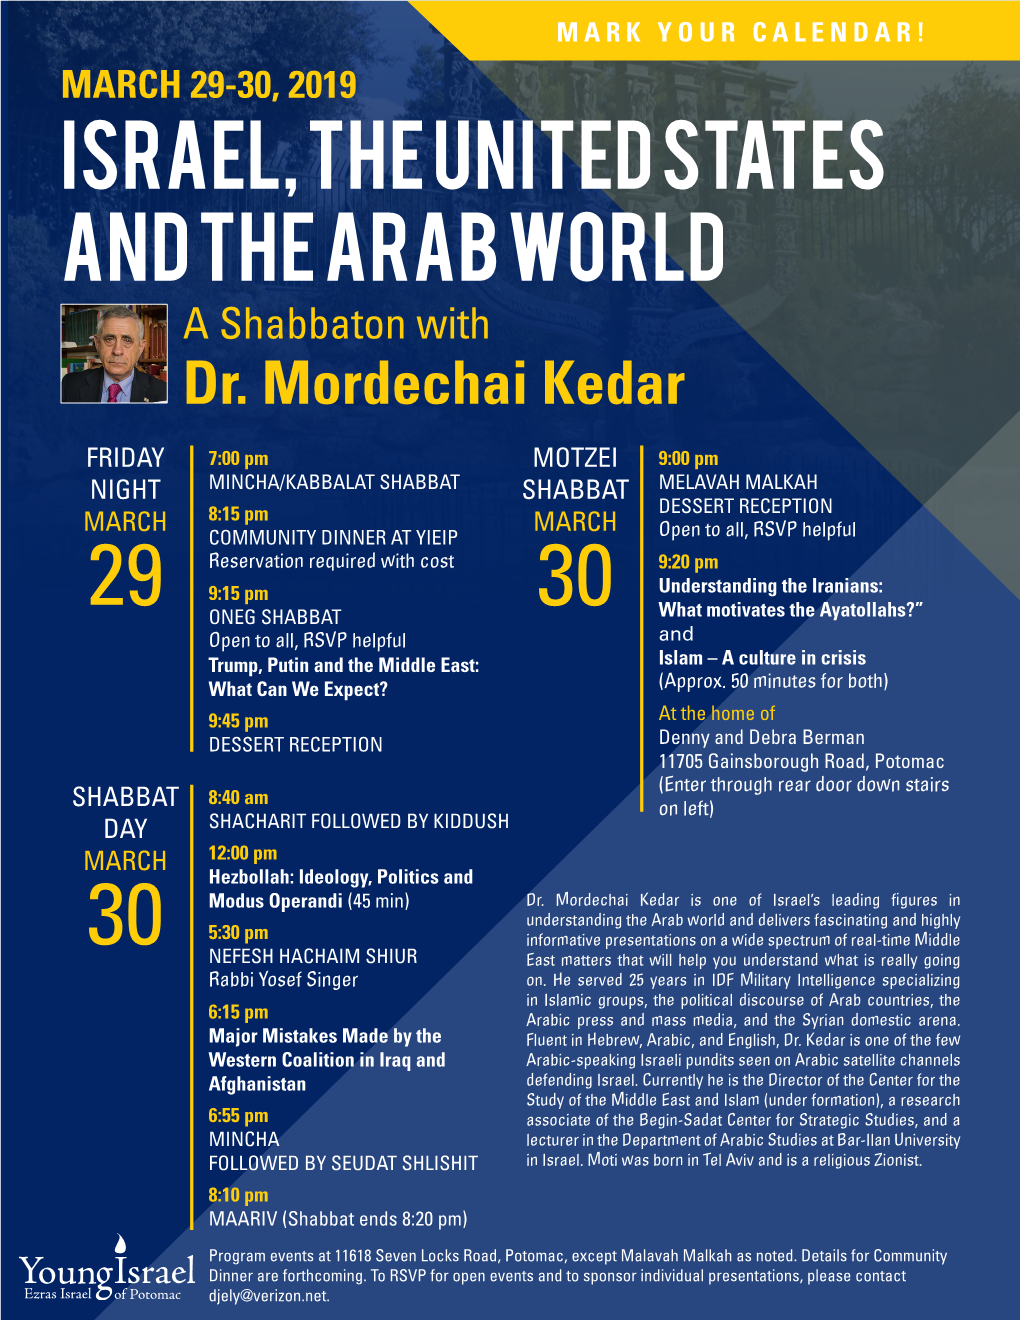 Israel, the United States and the Arab World a Shabbaton with Dr